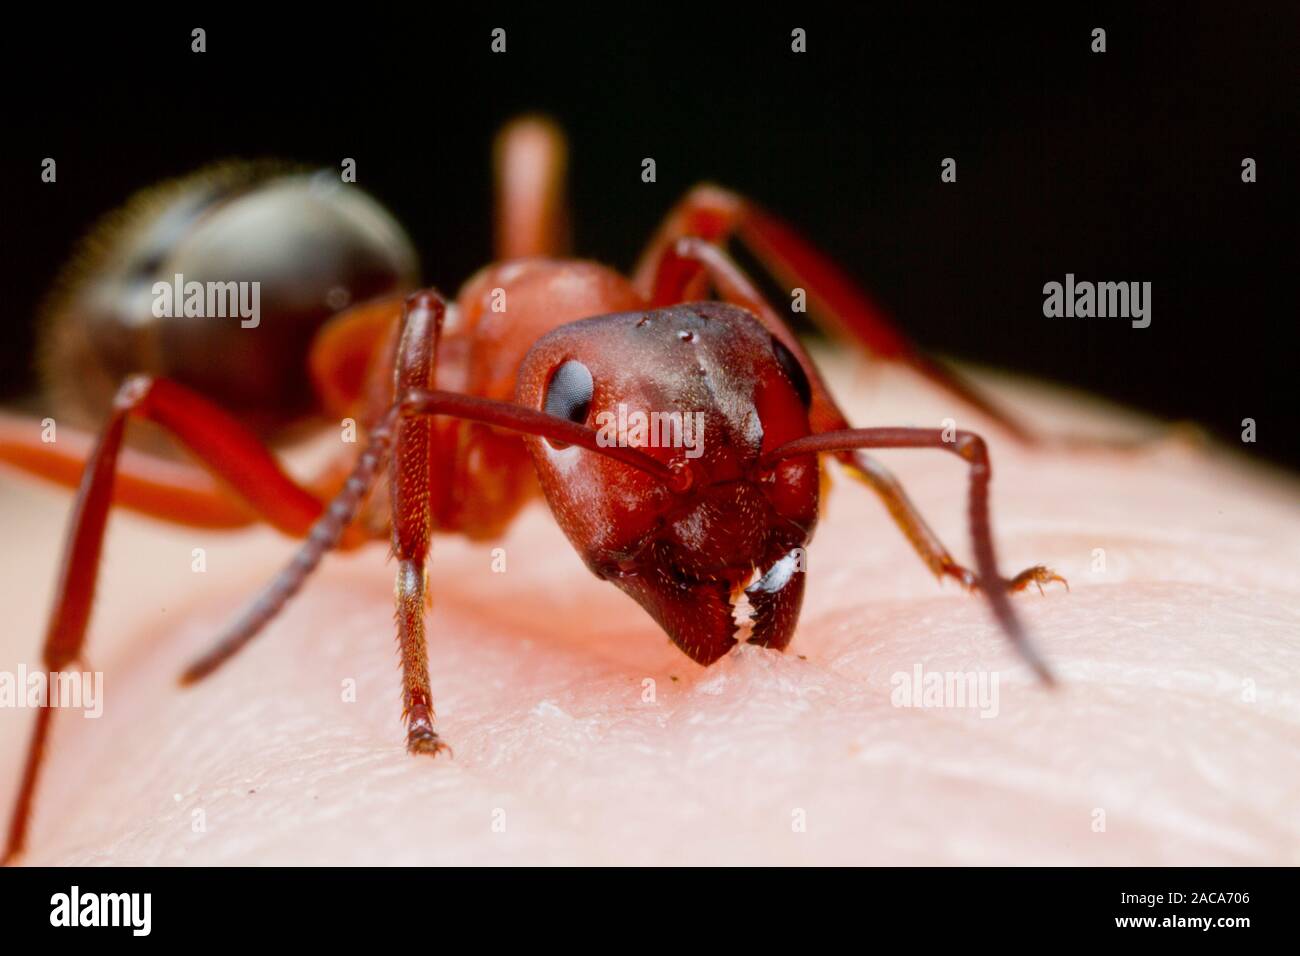 Blood-red Slave-making ant (Formica sanguinea) adult worker biting the photographer. Herefordshire, England. May. Stock Photo